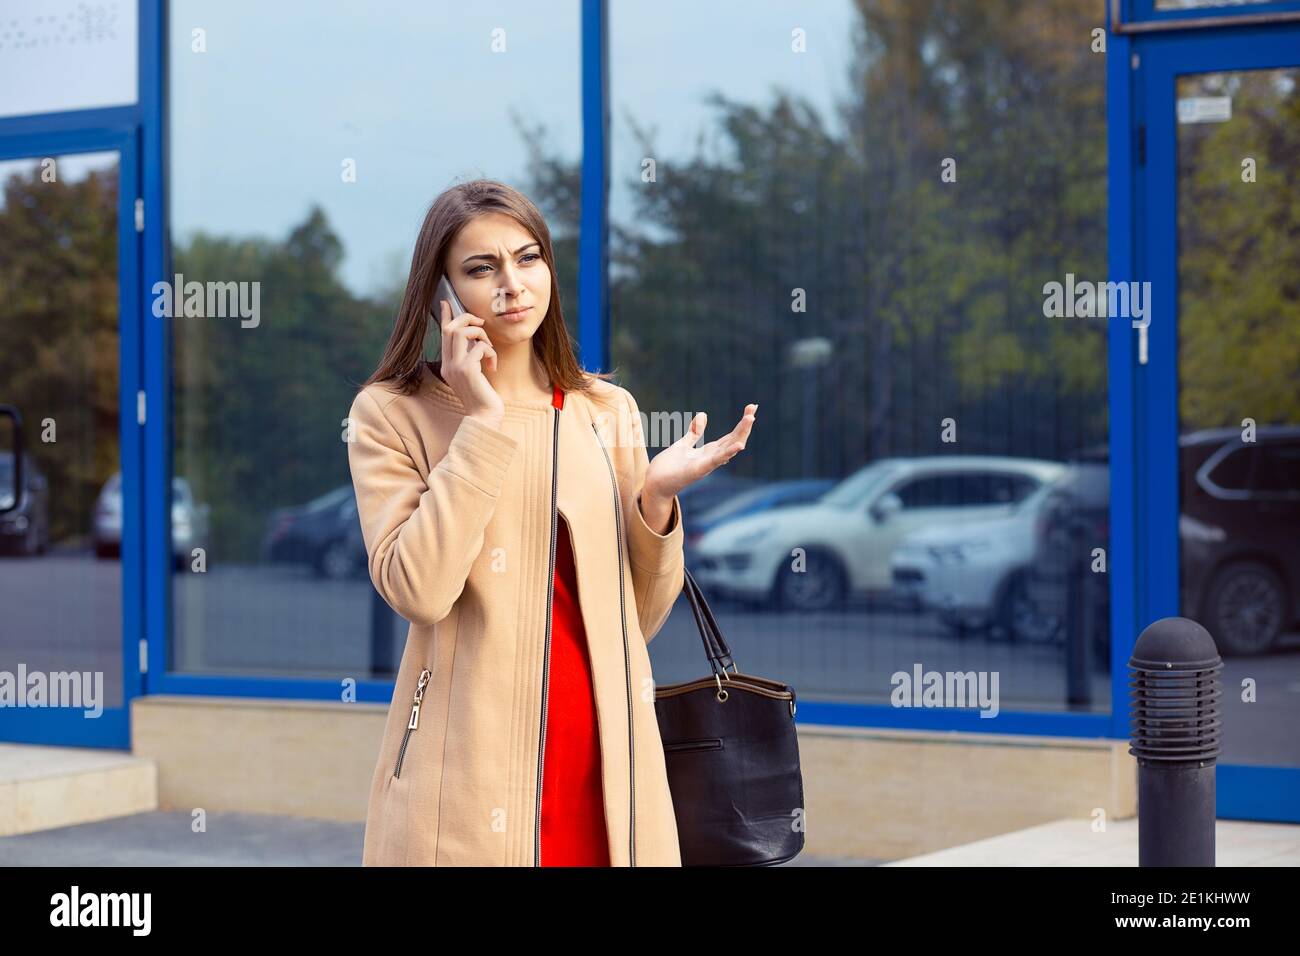 Closeup portrait upset sad, skeptical, unhappy, serious woman talking on phone displeased with conversation isolated outdoors background. Negative hum Stock Photo